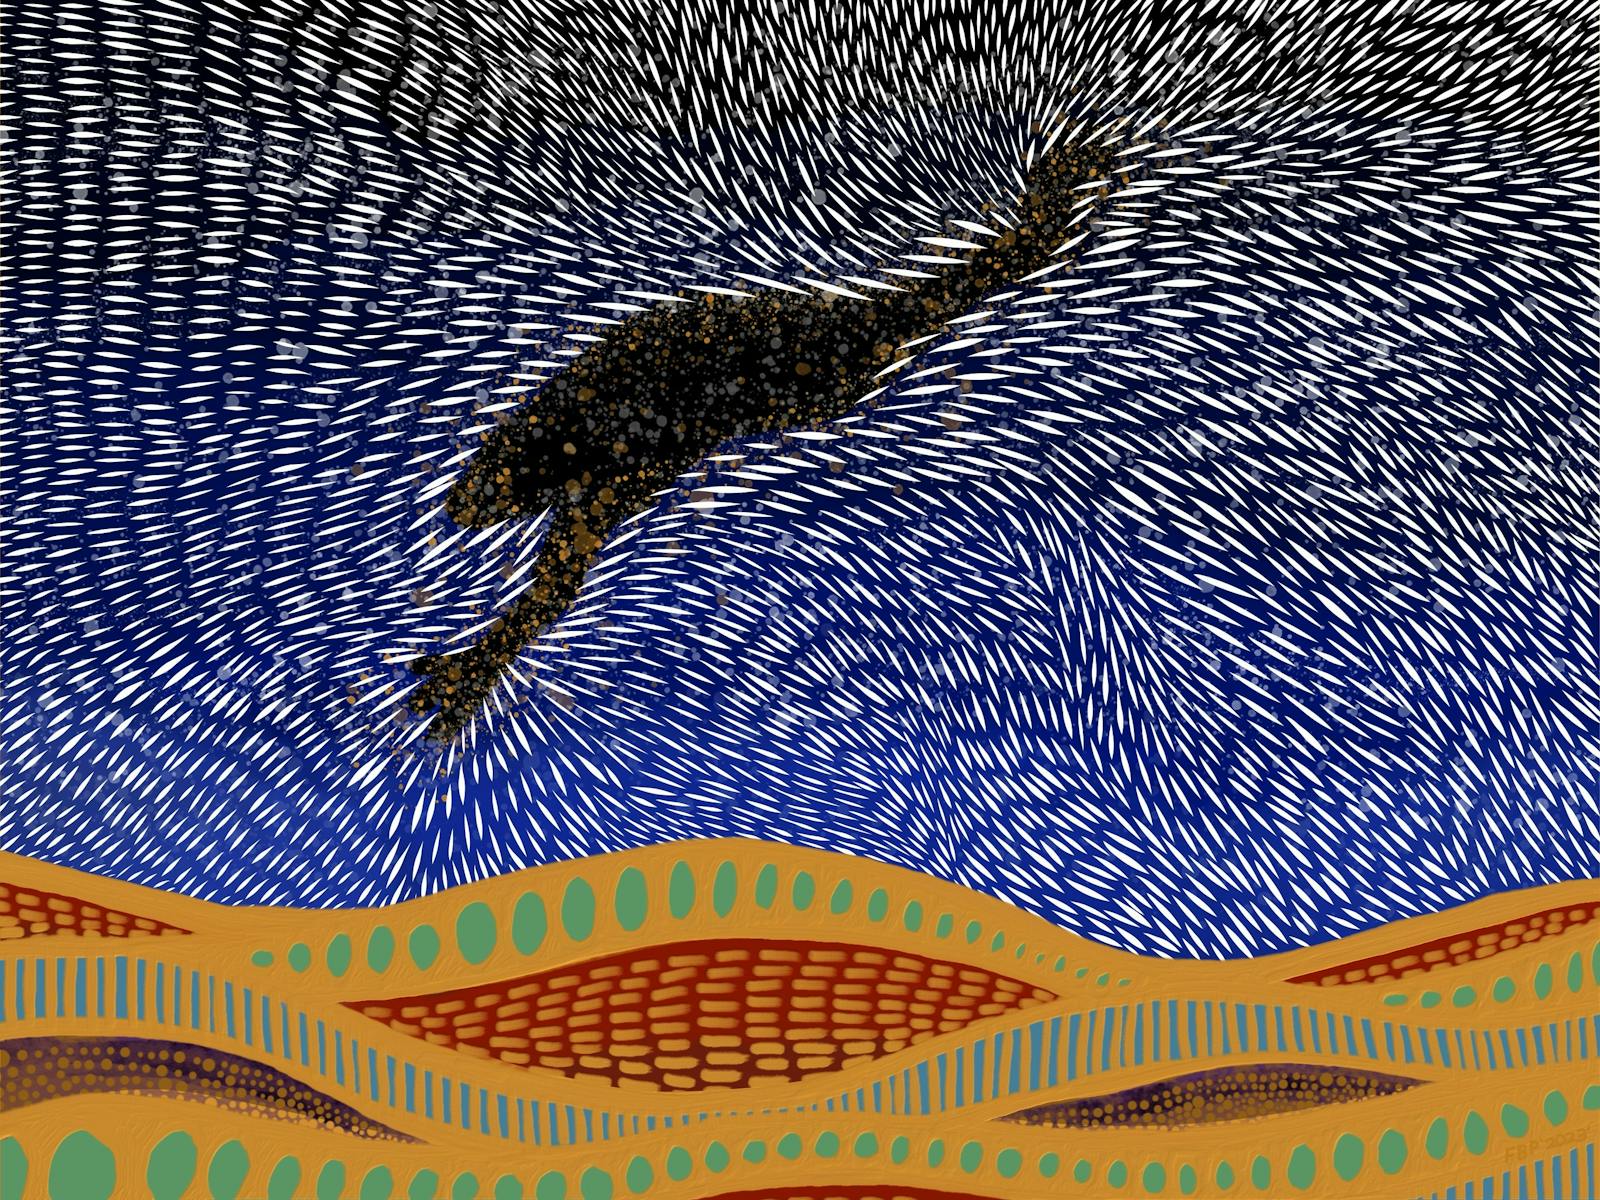 Image for Stars and Songlines Concert with Yaegl, Gumbaynggirr and Bundjalung Musicians